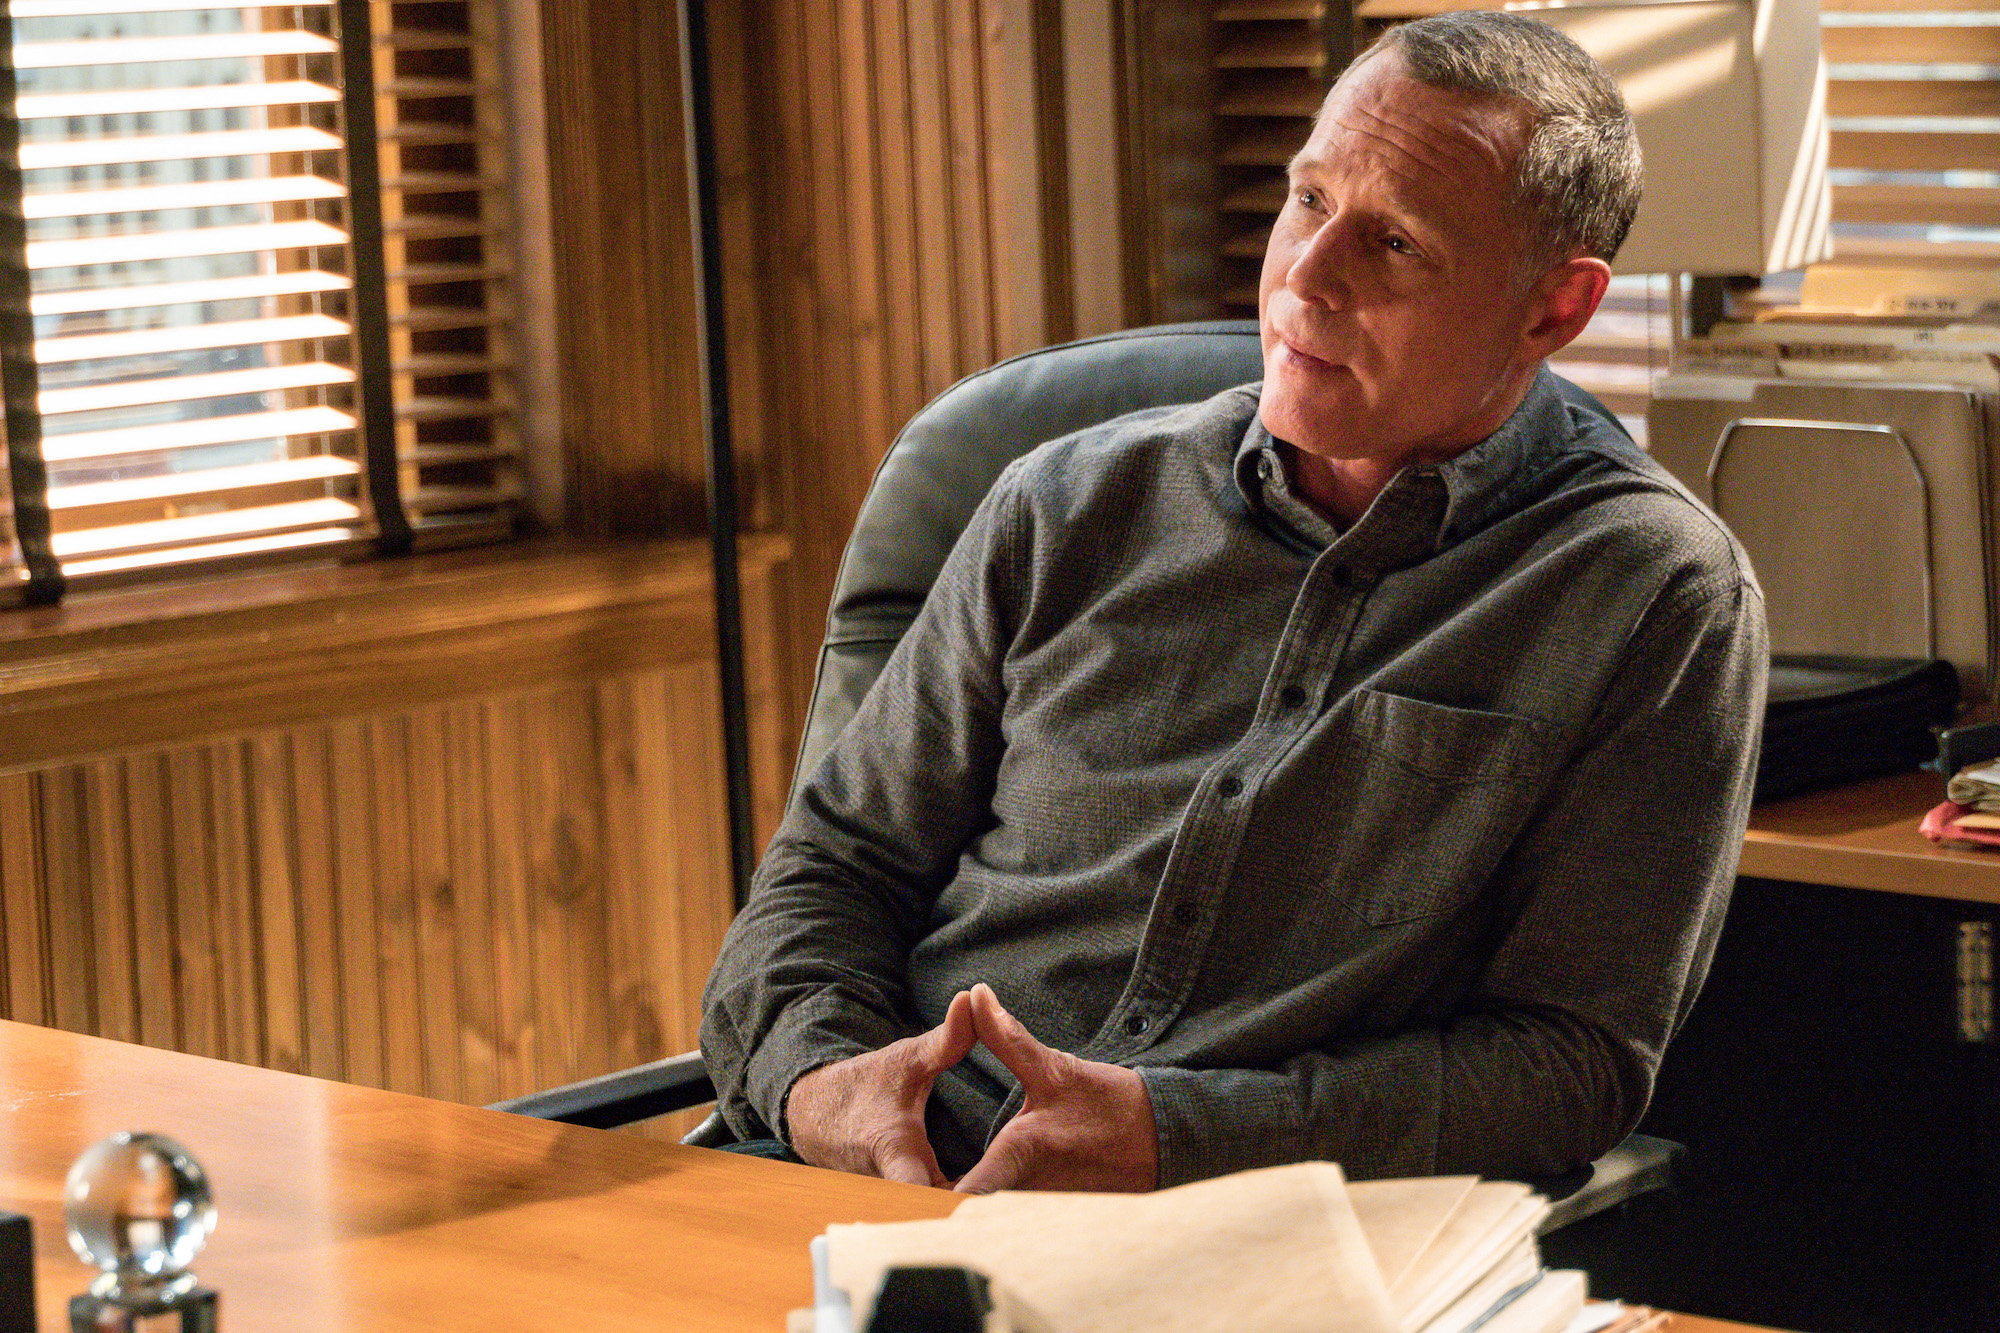 Jason Beghe as Sgt. Hank Voight on 'Chicago P.D.' sitting at a desk